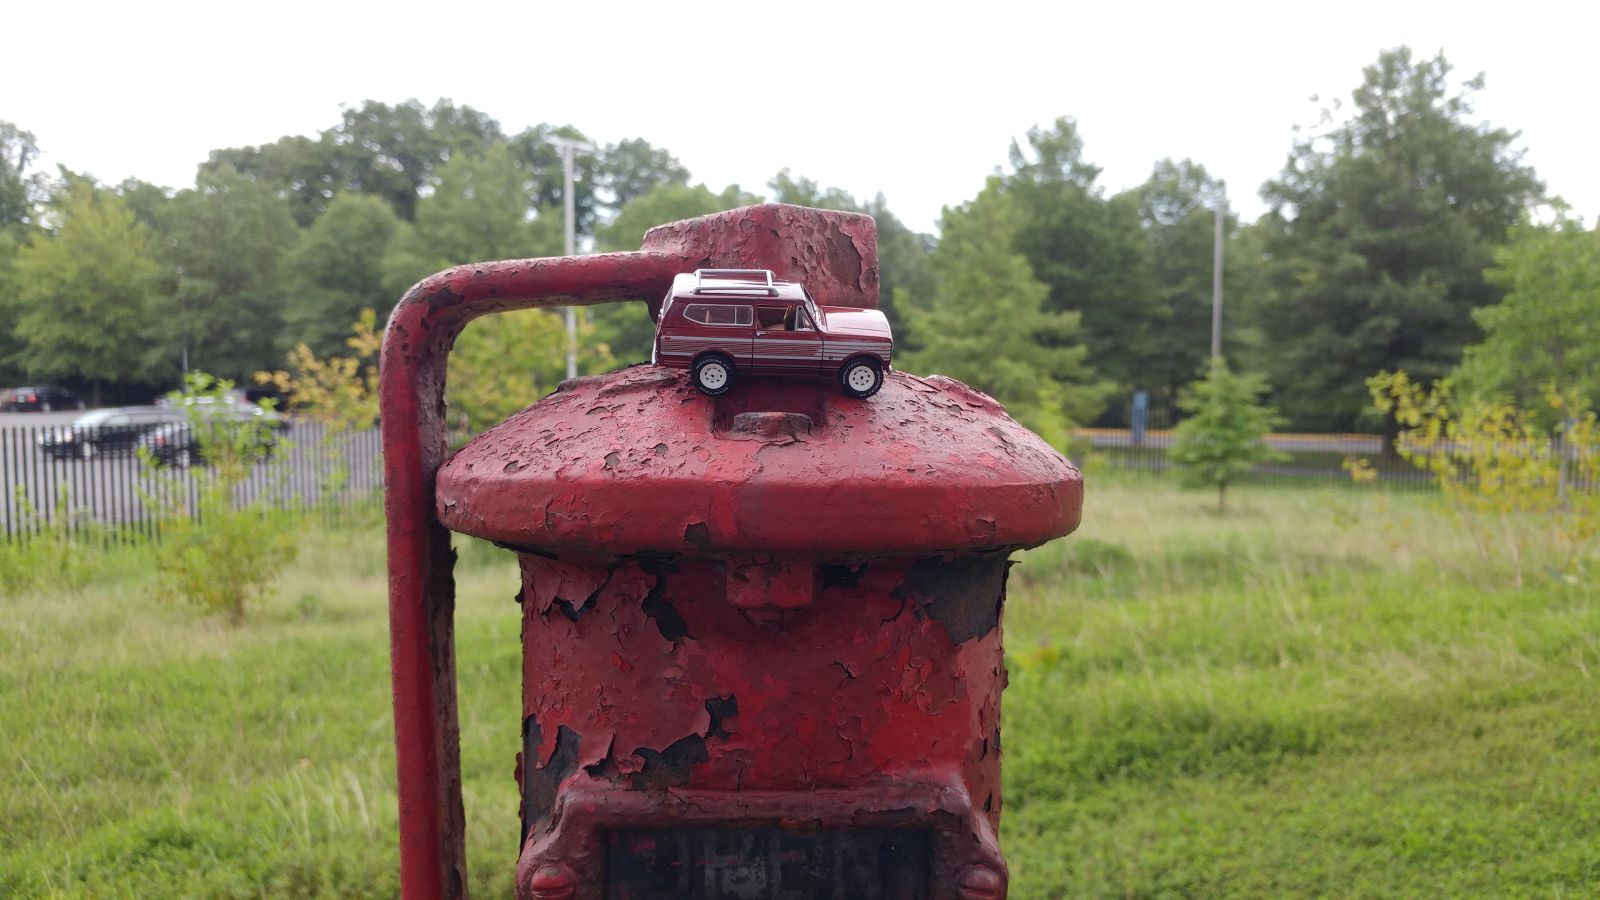 This is a really old fire hydrant on campus. It has the year 1958 stamped on it, so definitely predates the Scout.